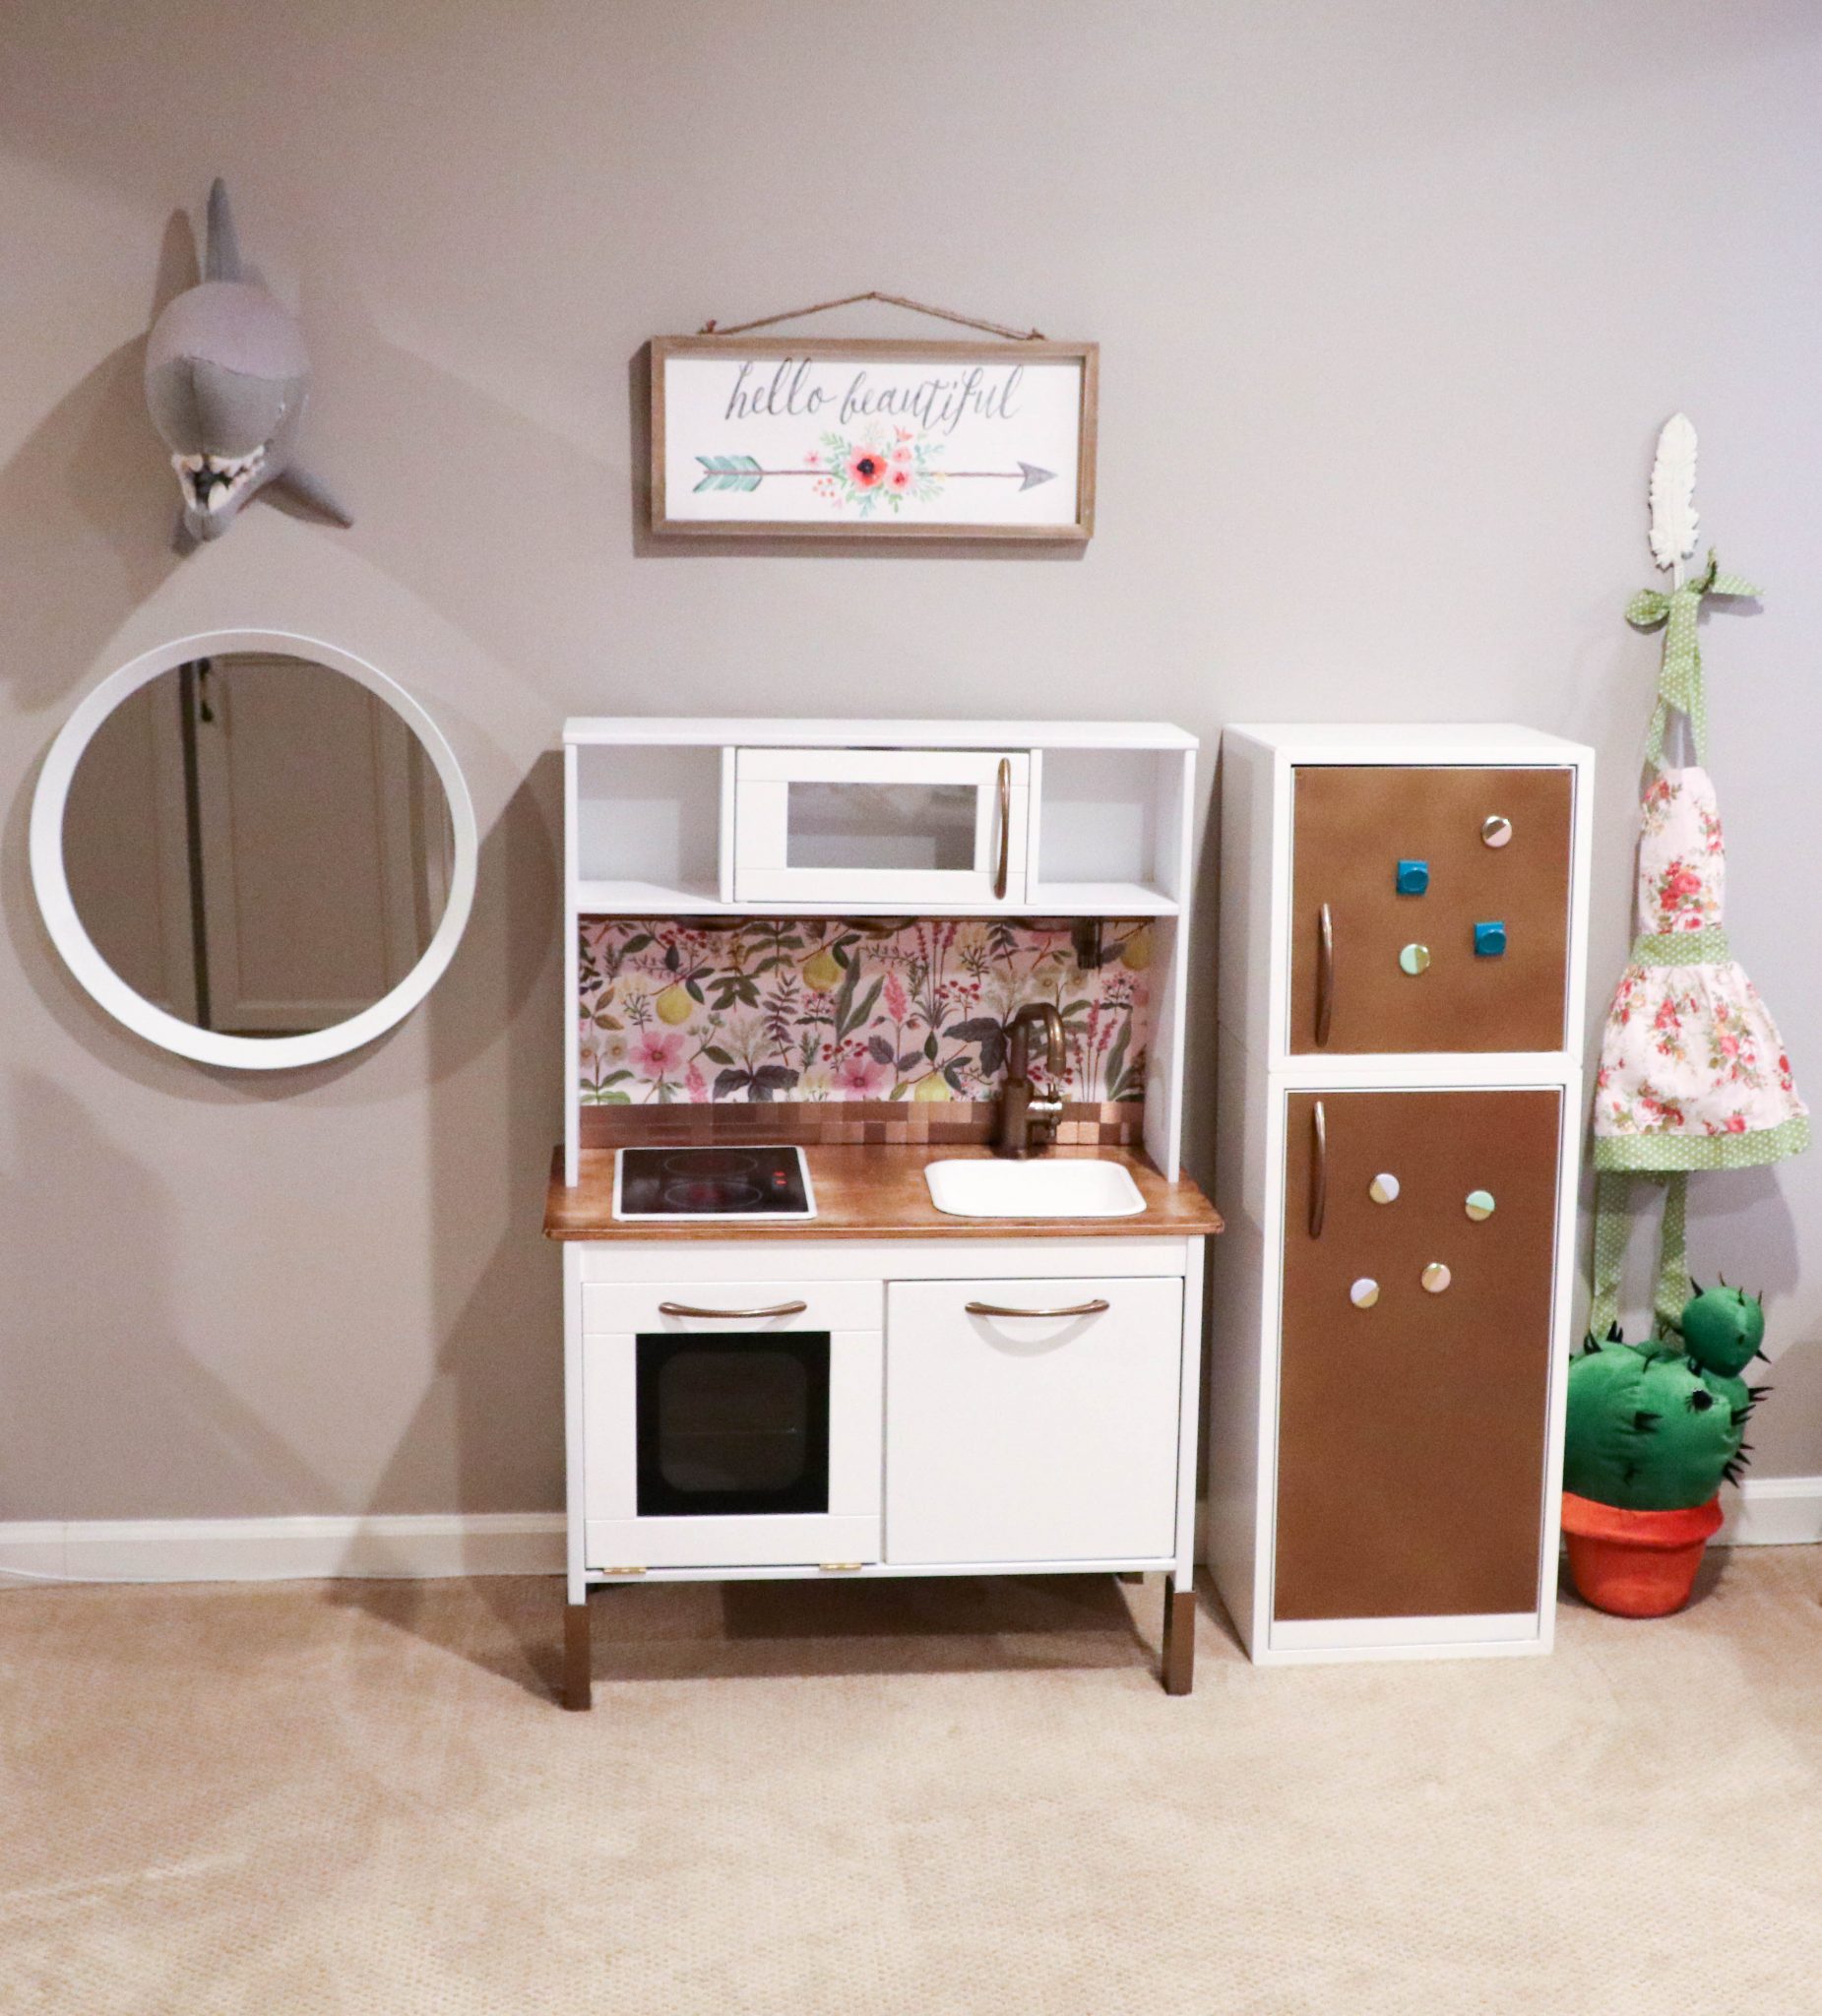 IKEA Hack: Building Your Child's Dream DUKTIG Play Kitchen | Saving Amy